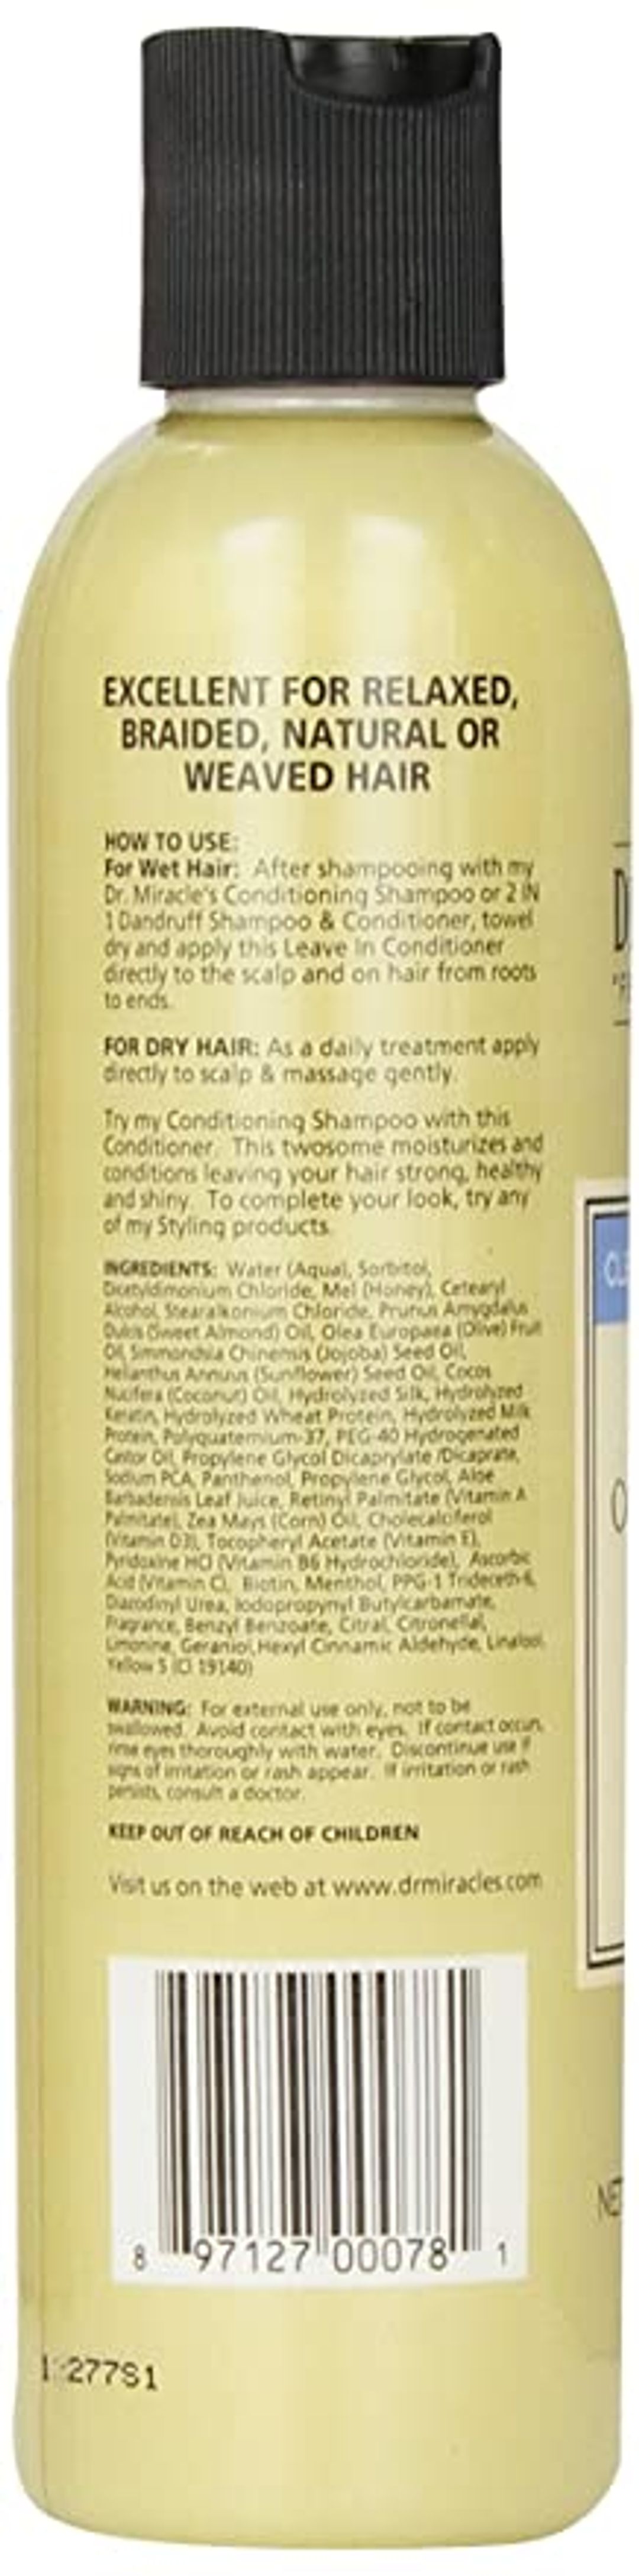 Dr. Miracle's Leave-in Conditioner - 8oz